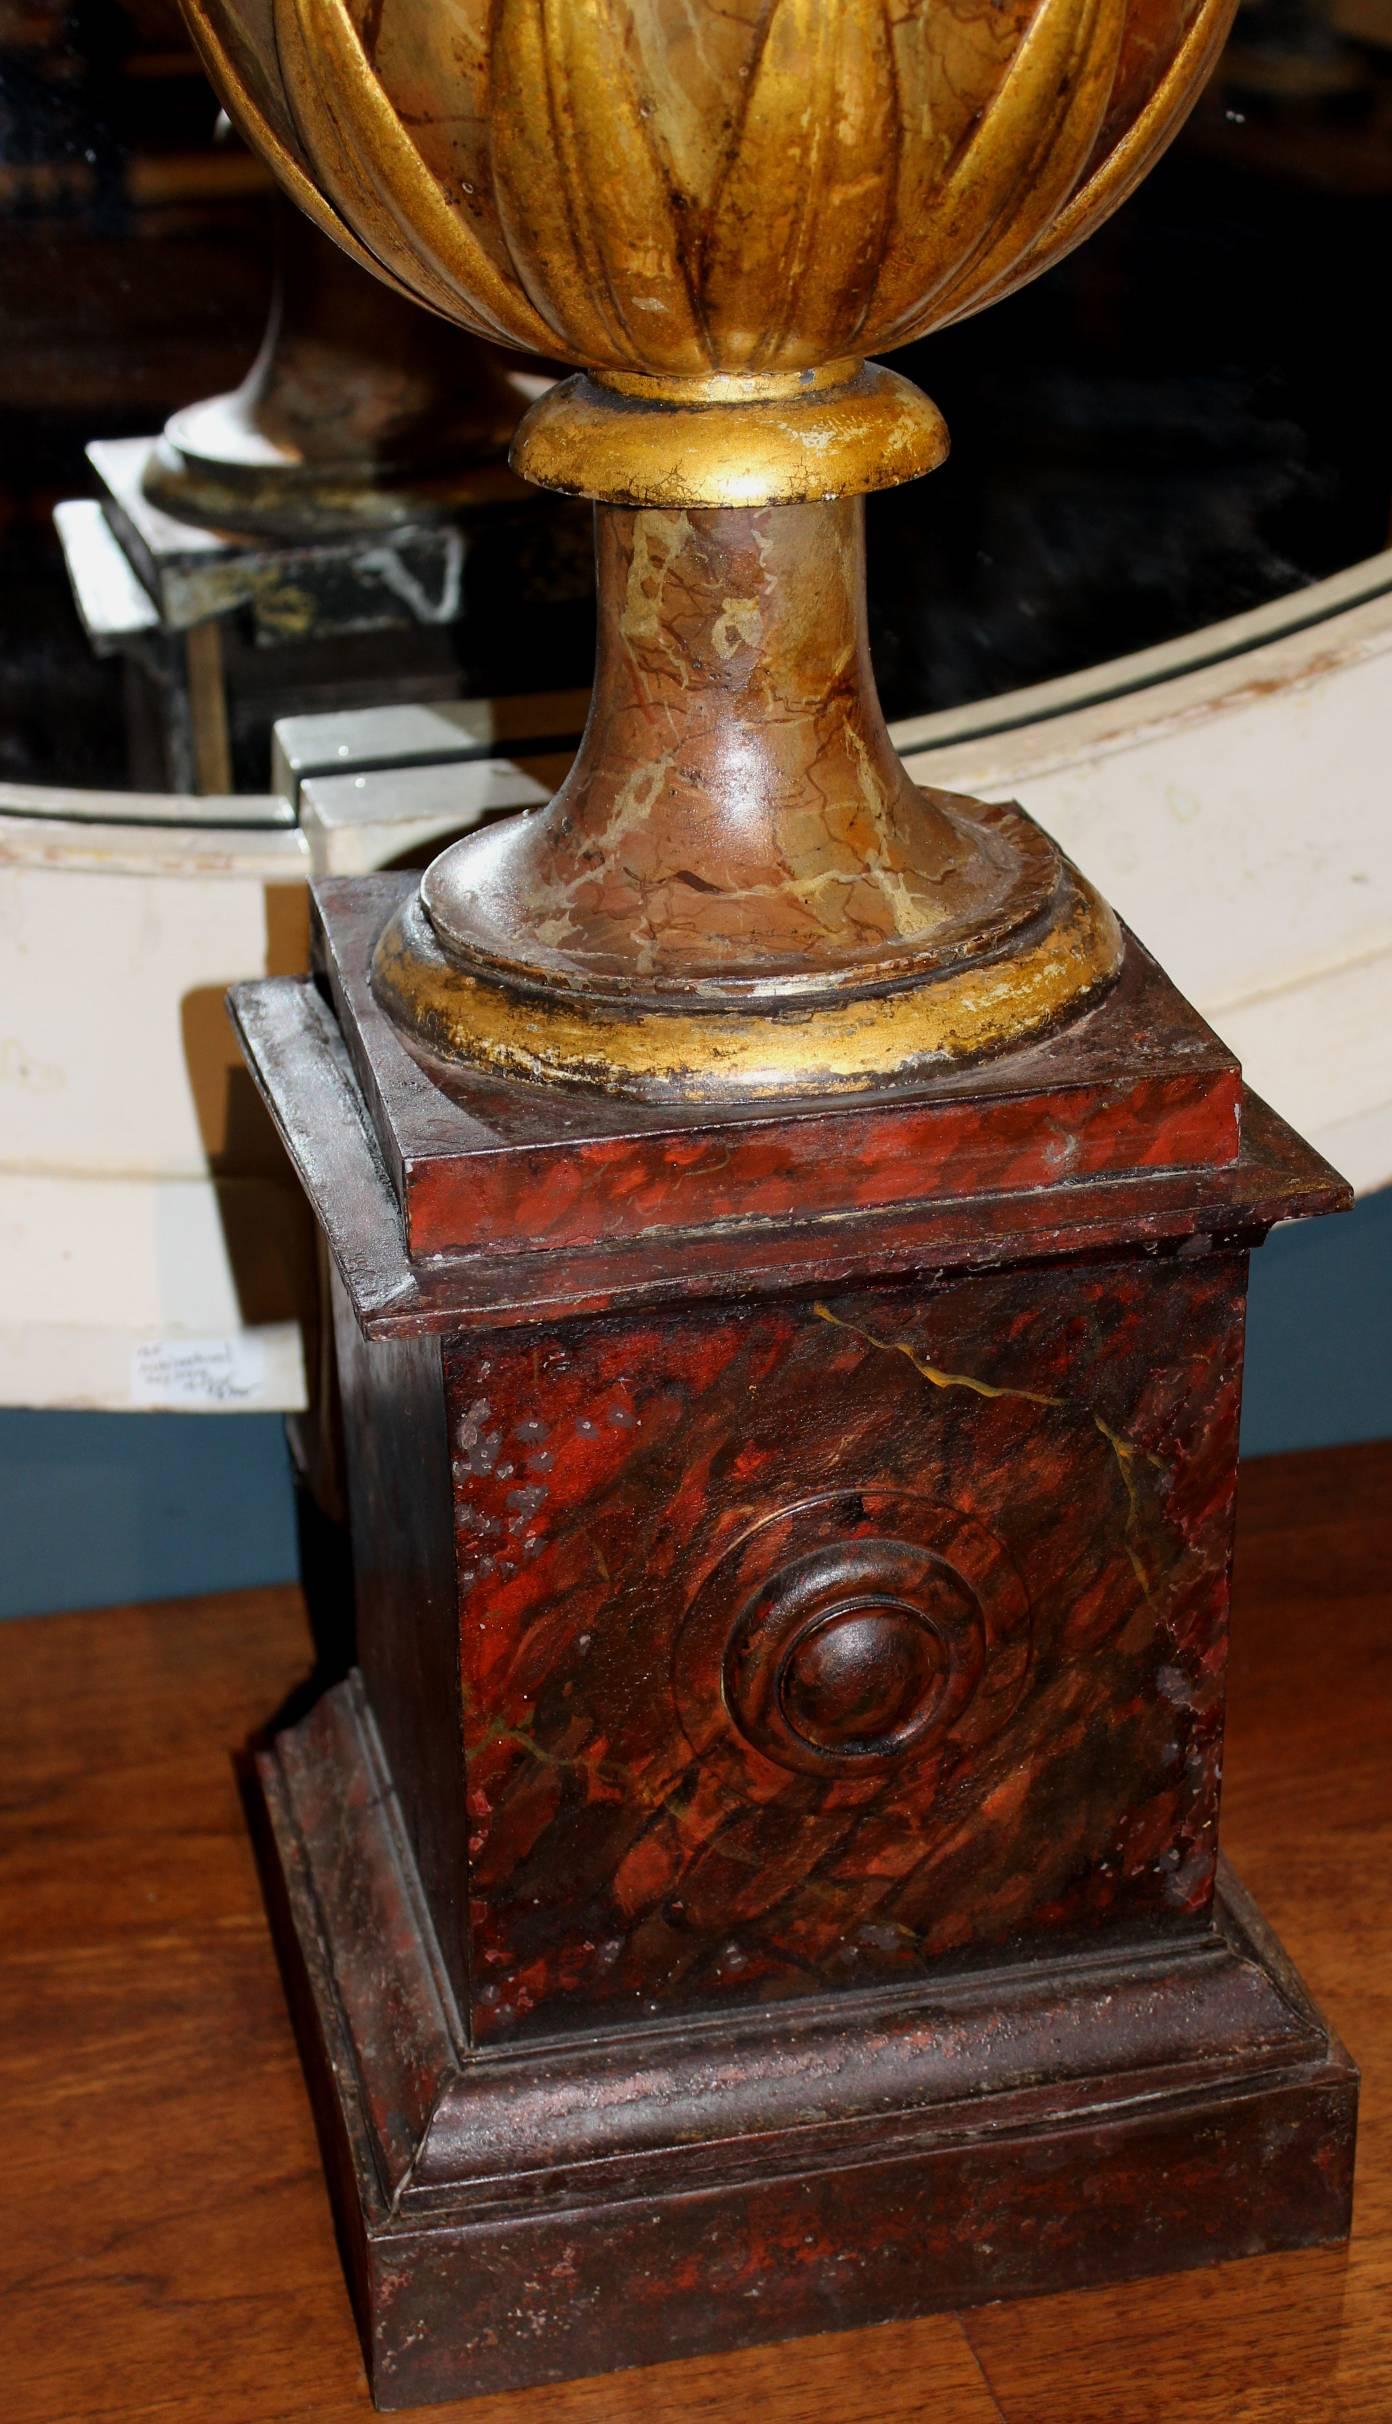 Tin Early 19th Century European Tole Polychromed Urn or Finial